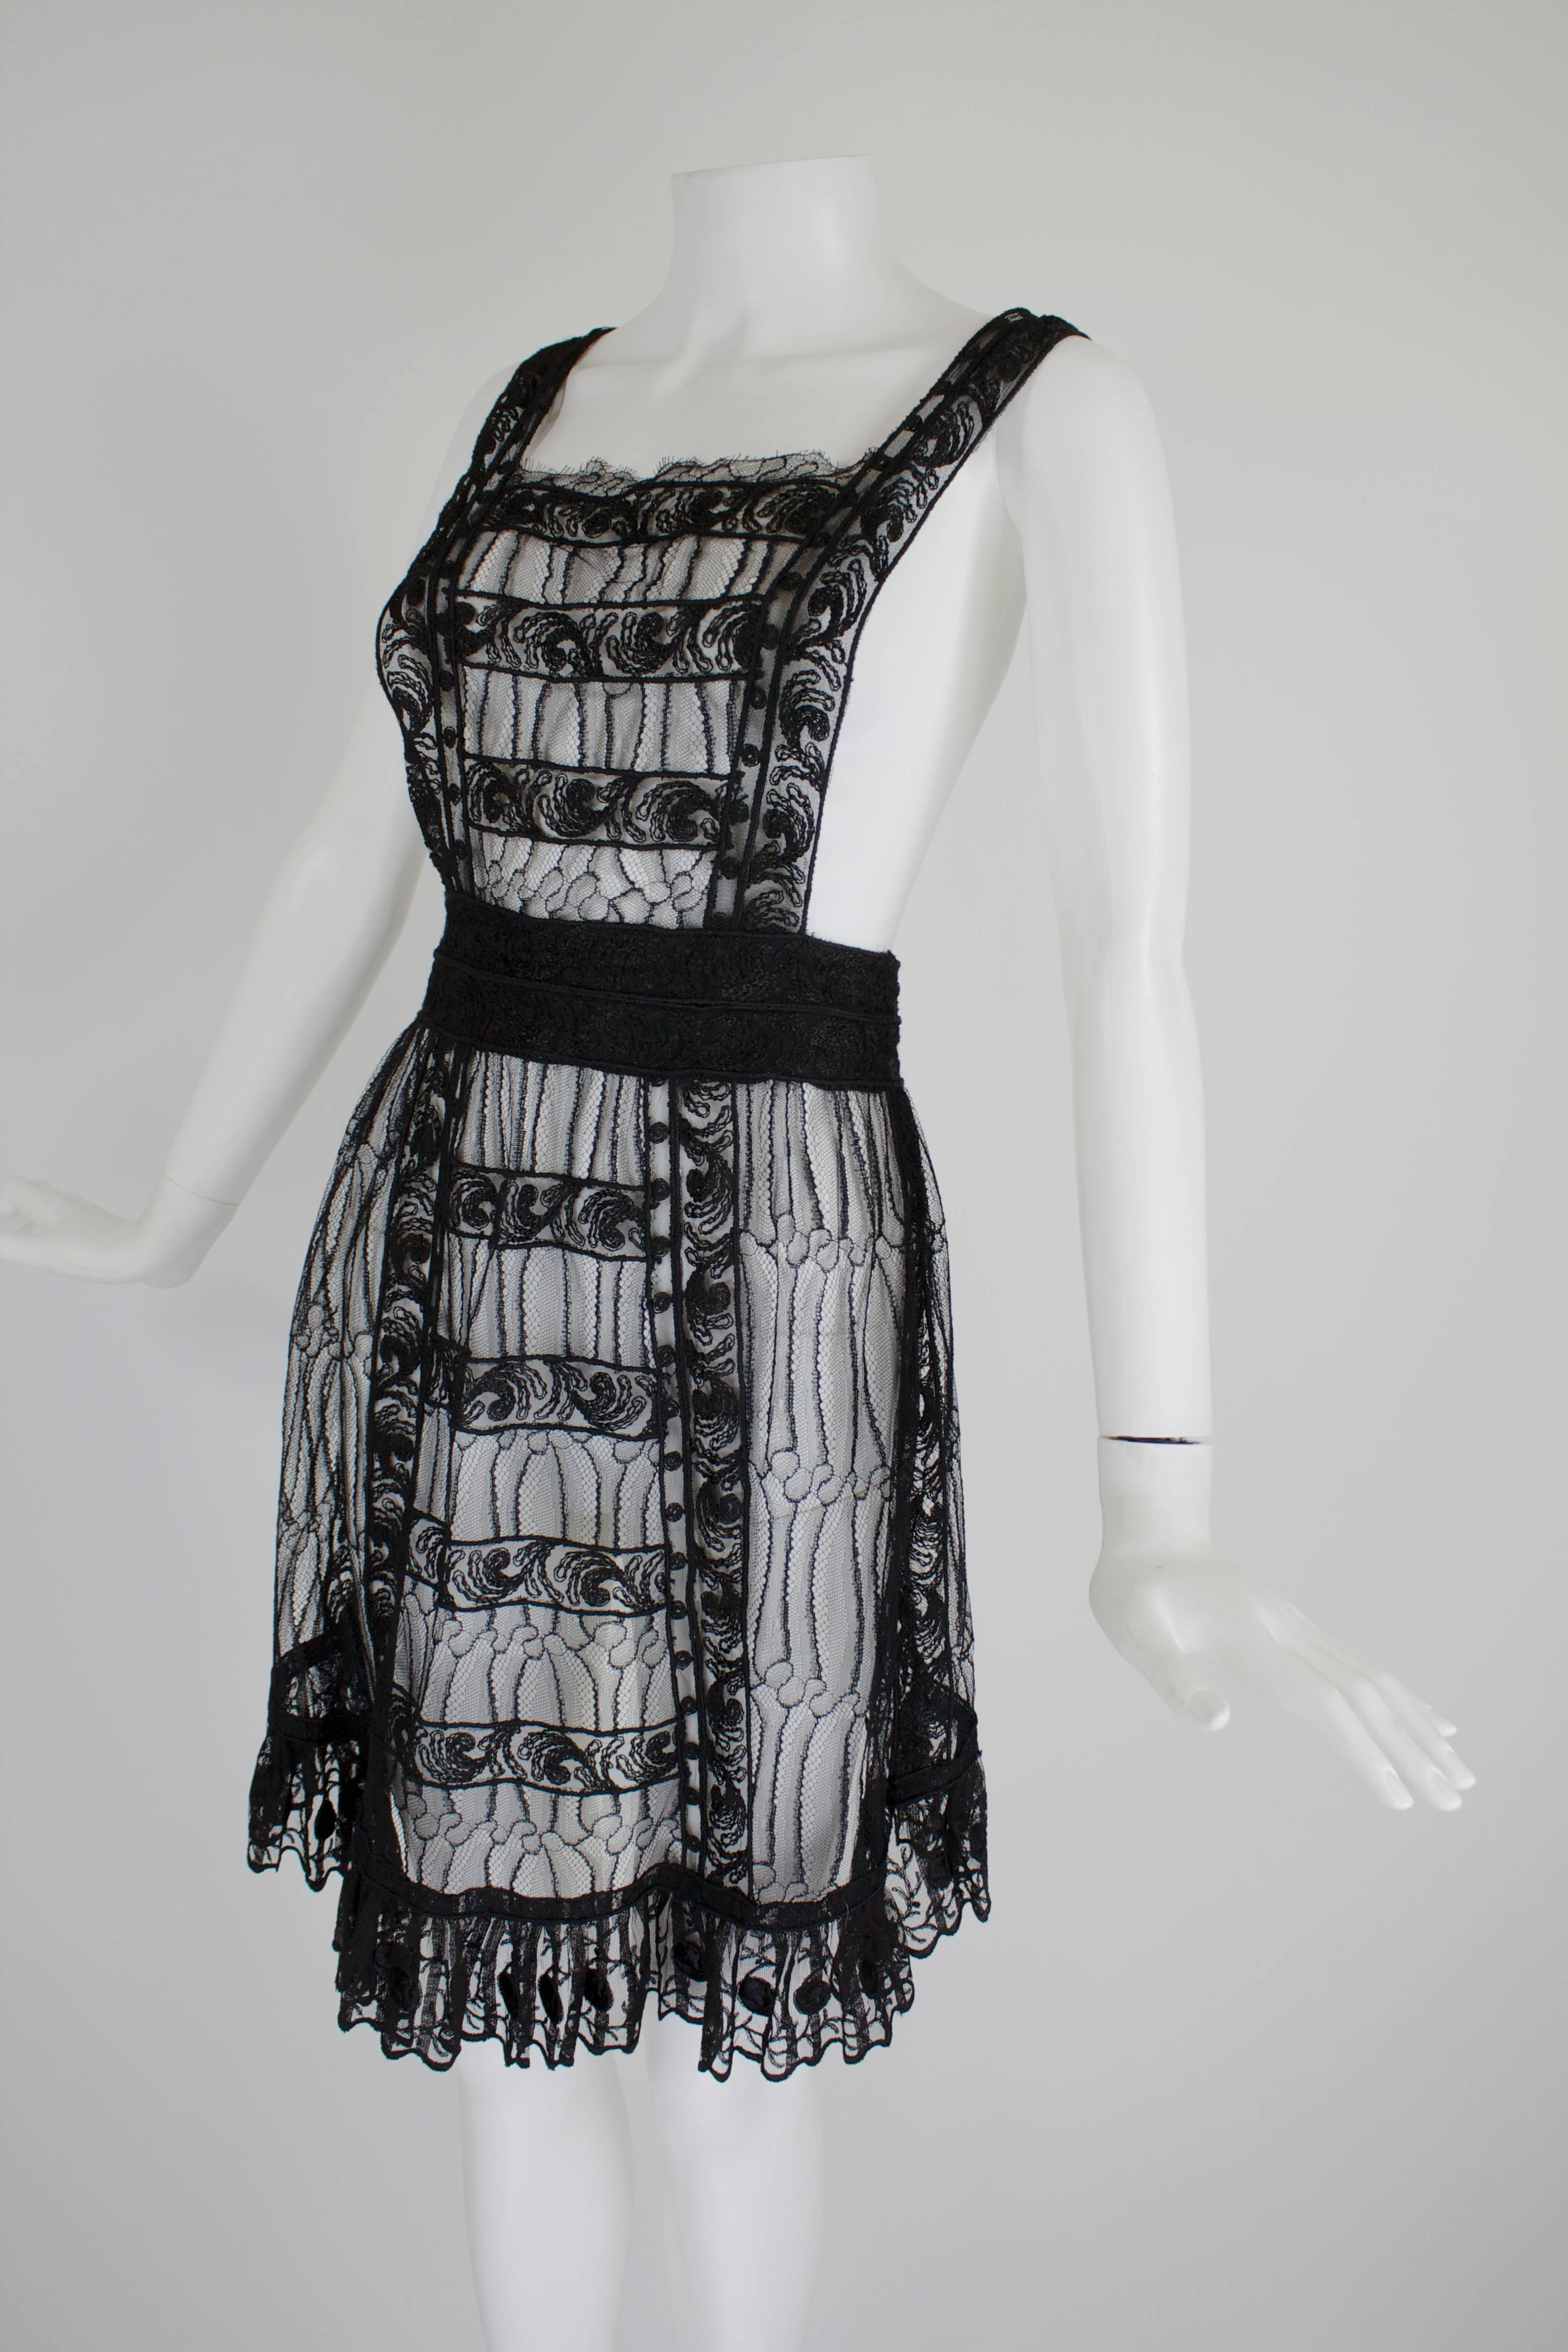 Chloe Black Lace Embroidered Pinafore In Excellent Condition For Sale In Los Angeles, CA